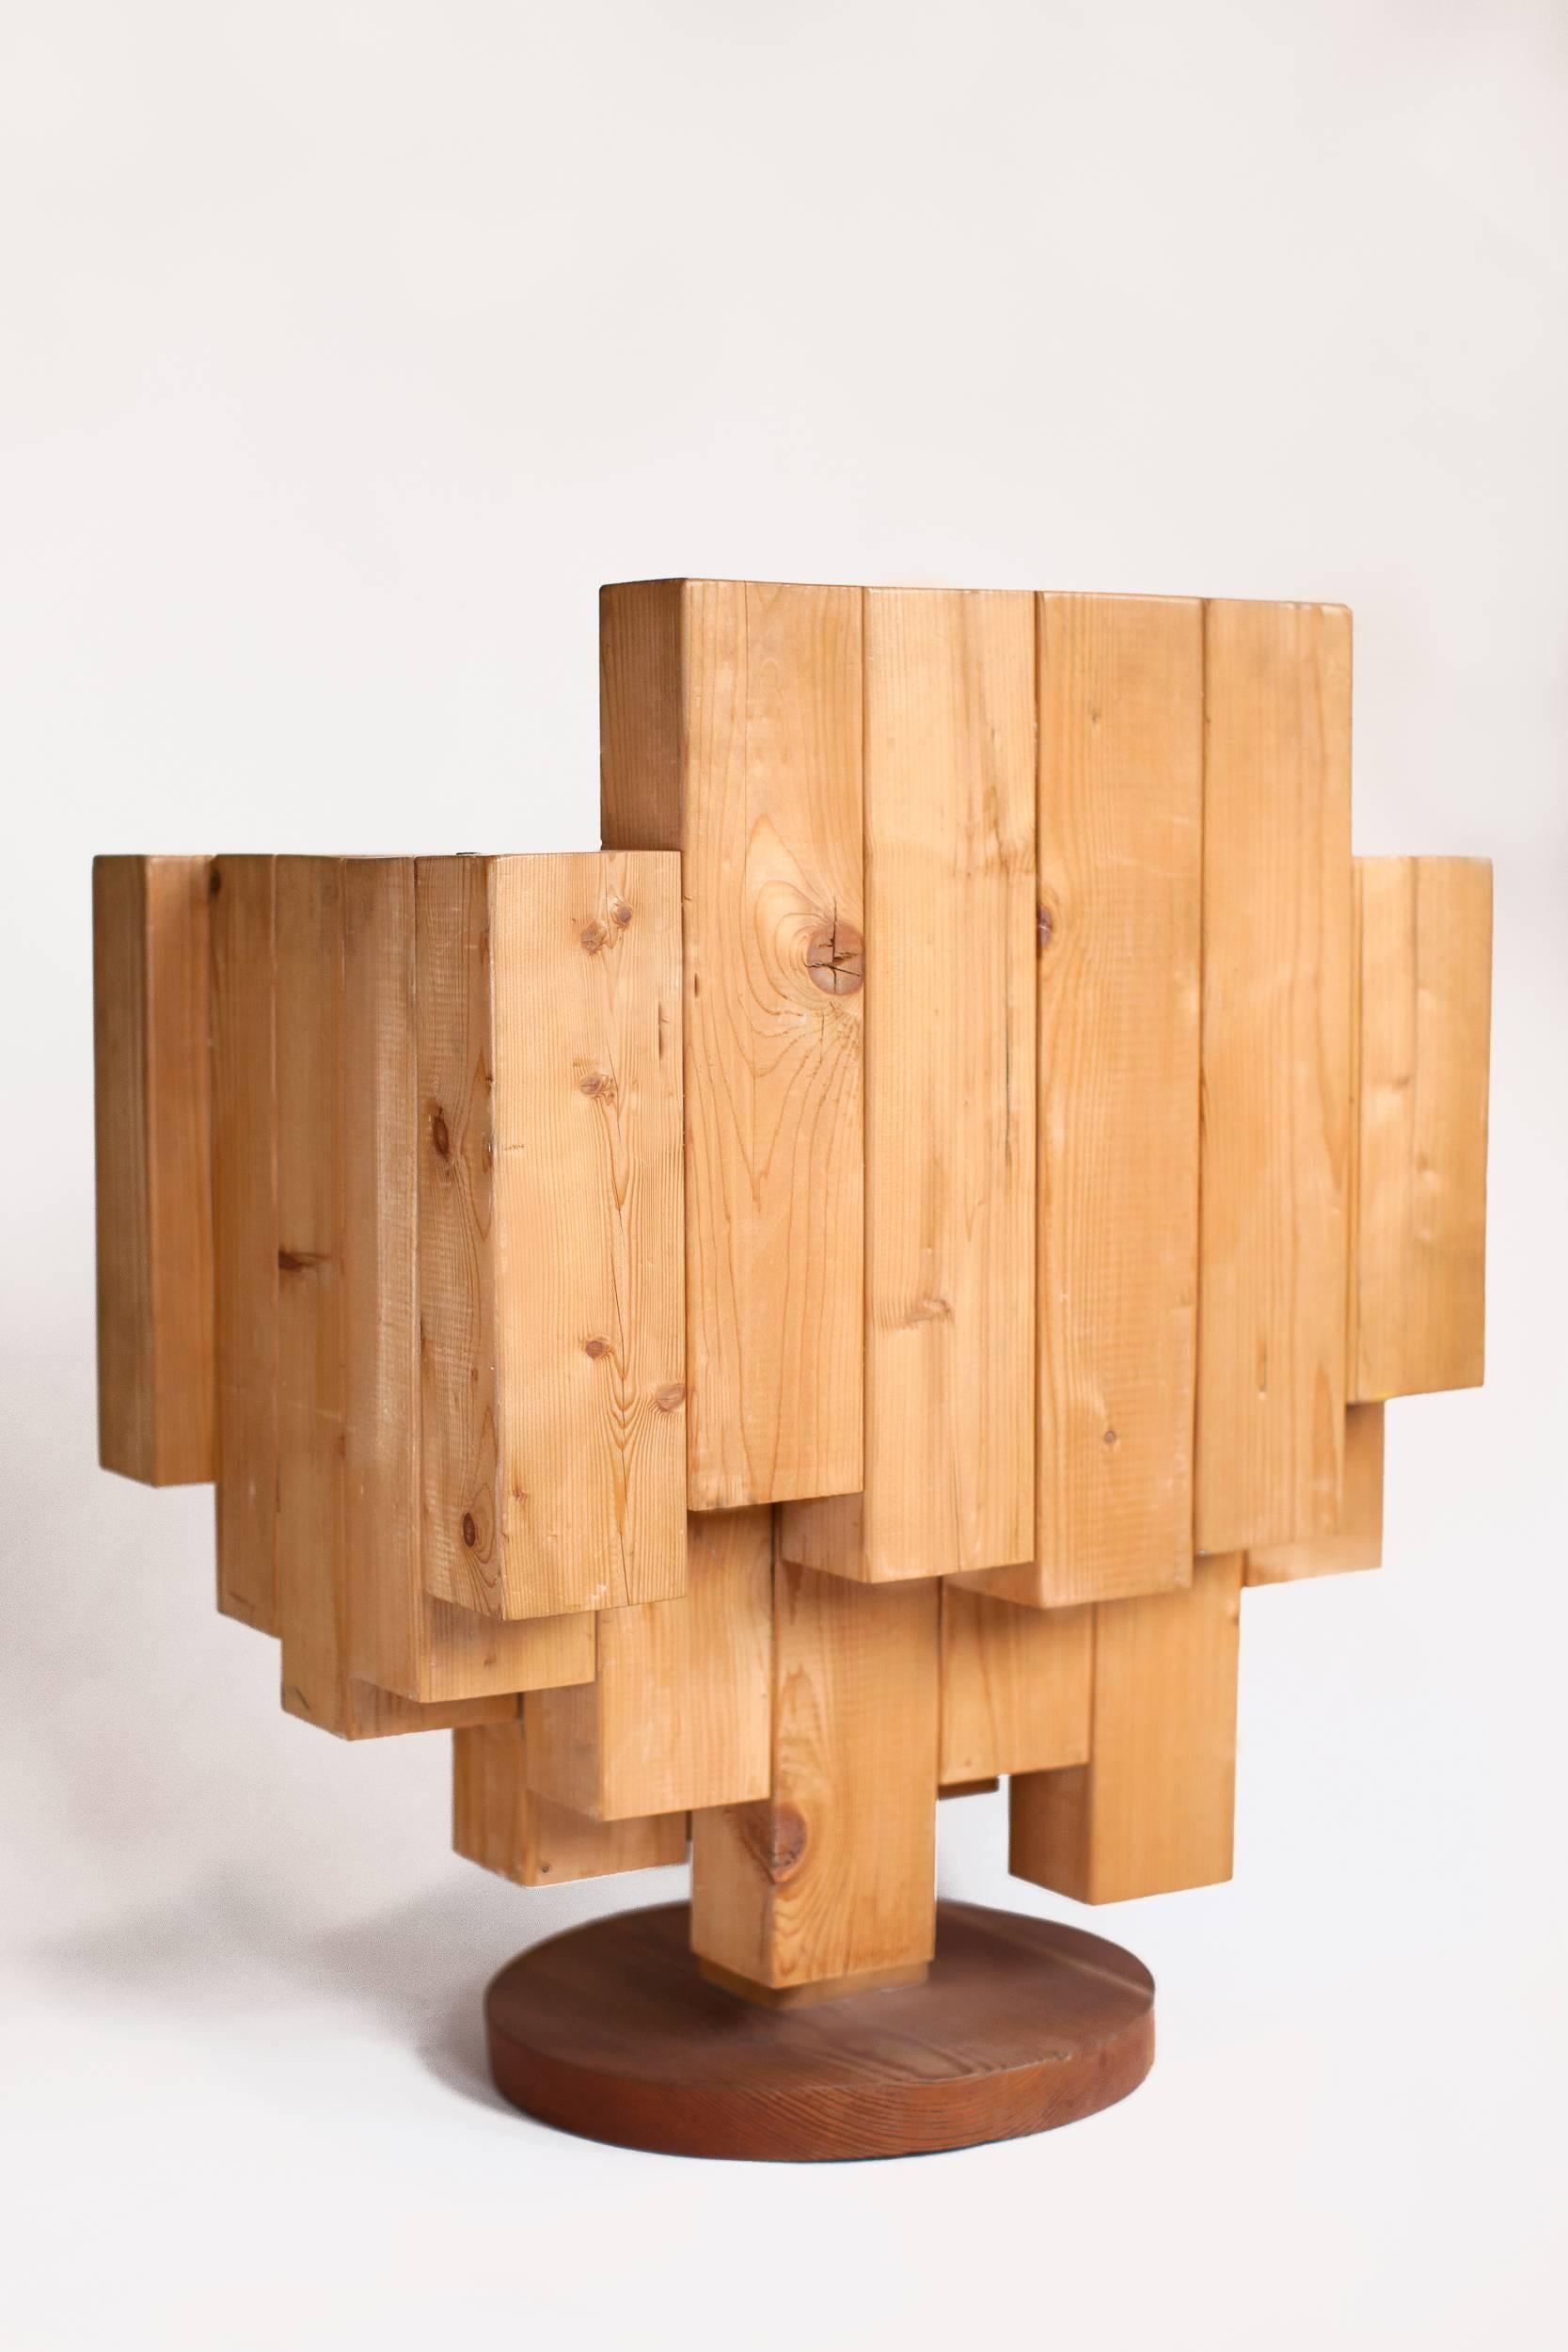 Modern One of a Kind Sculptural Cubist Armchair in Pine by Giorgio Mariani, Italy 2005 For Sale